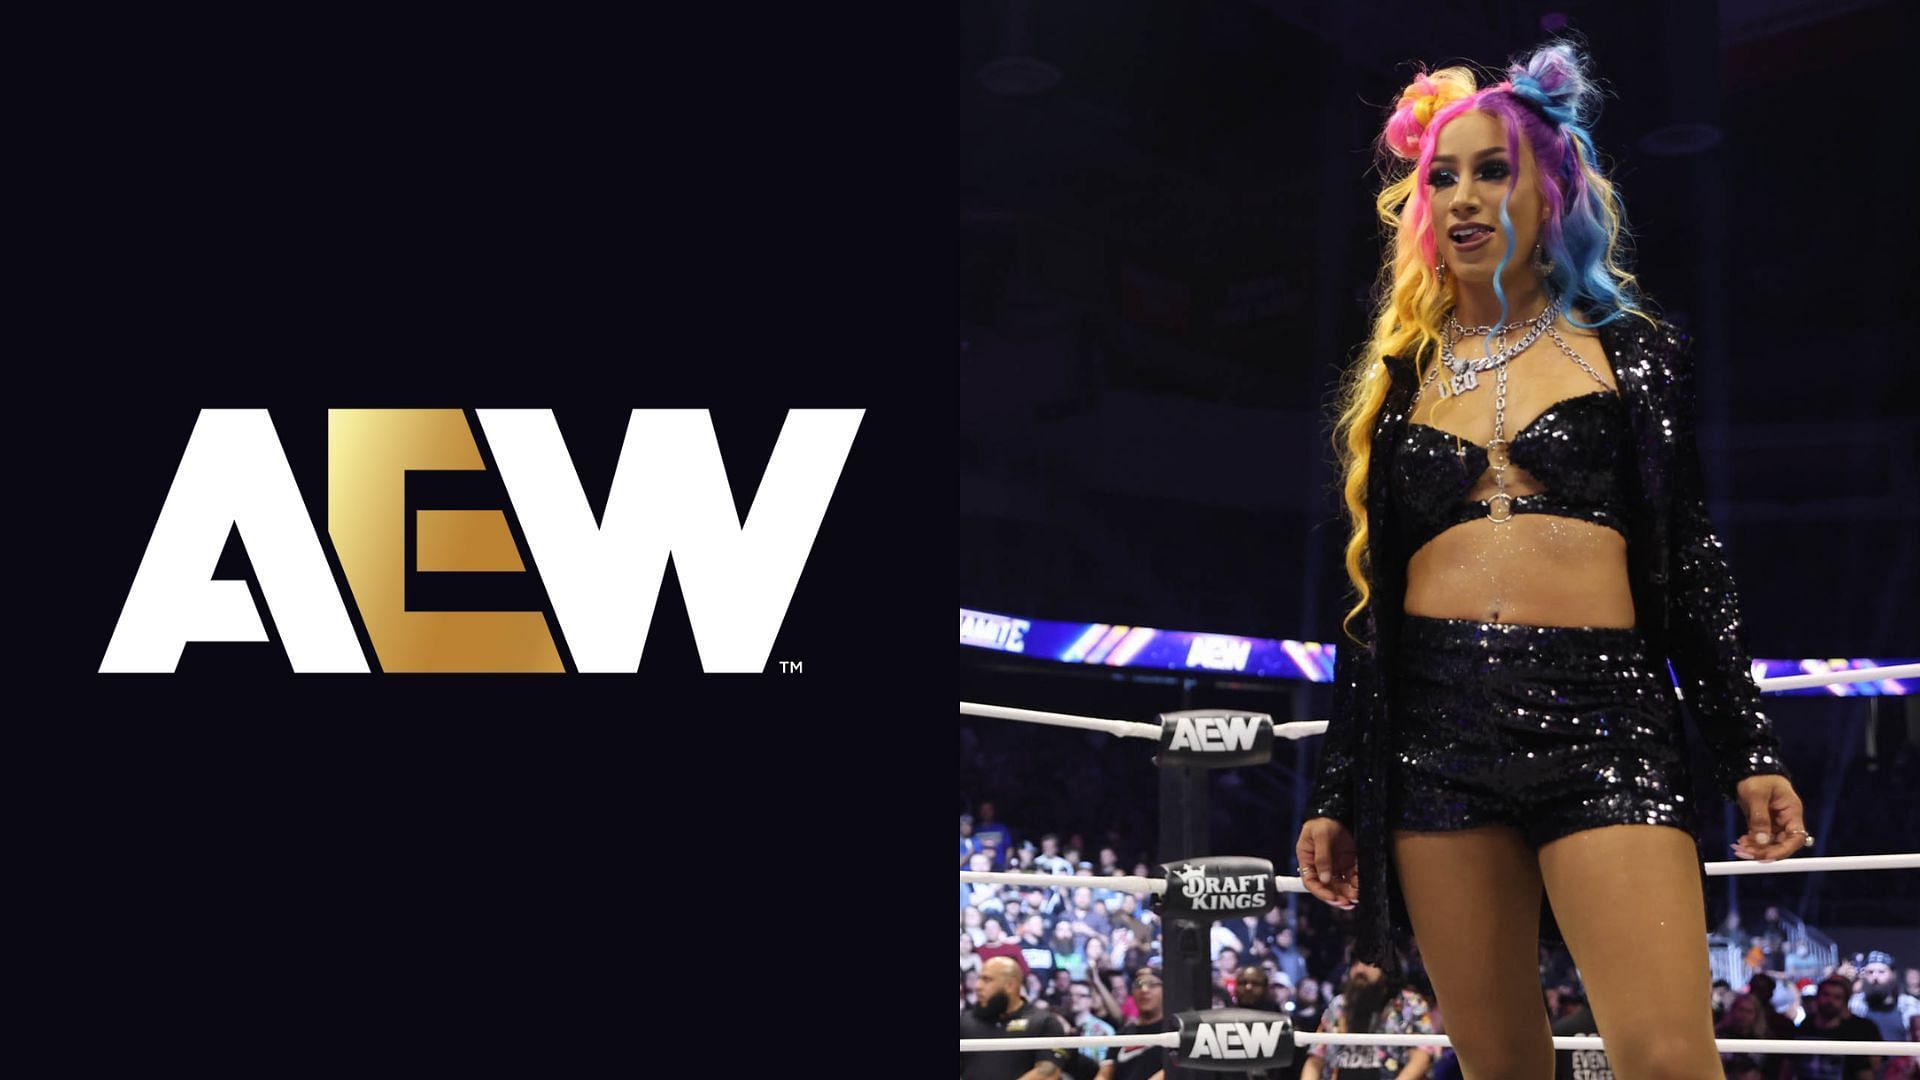 Mercedes Mone is a former WWE Superstar who is now signed with AEW [Photo courtesy of AEW